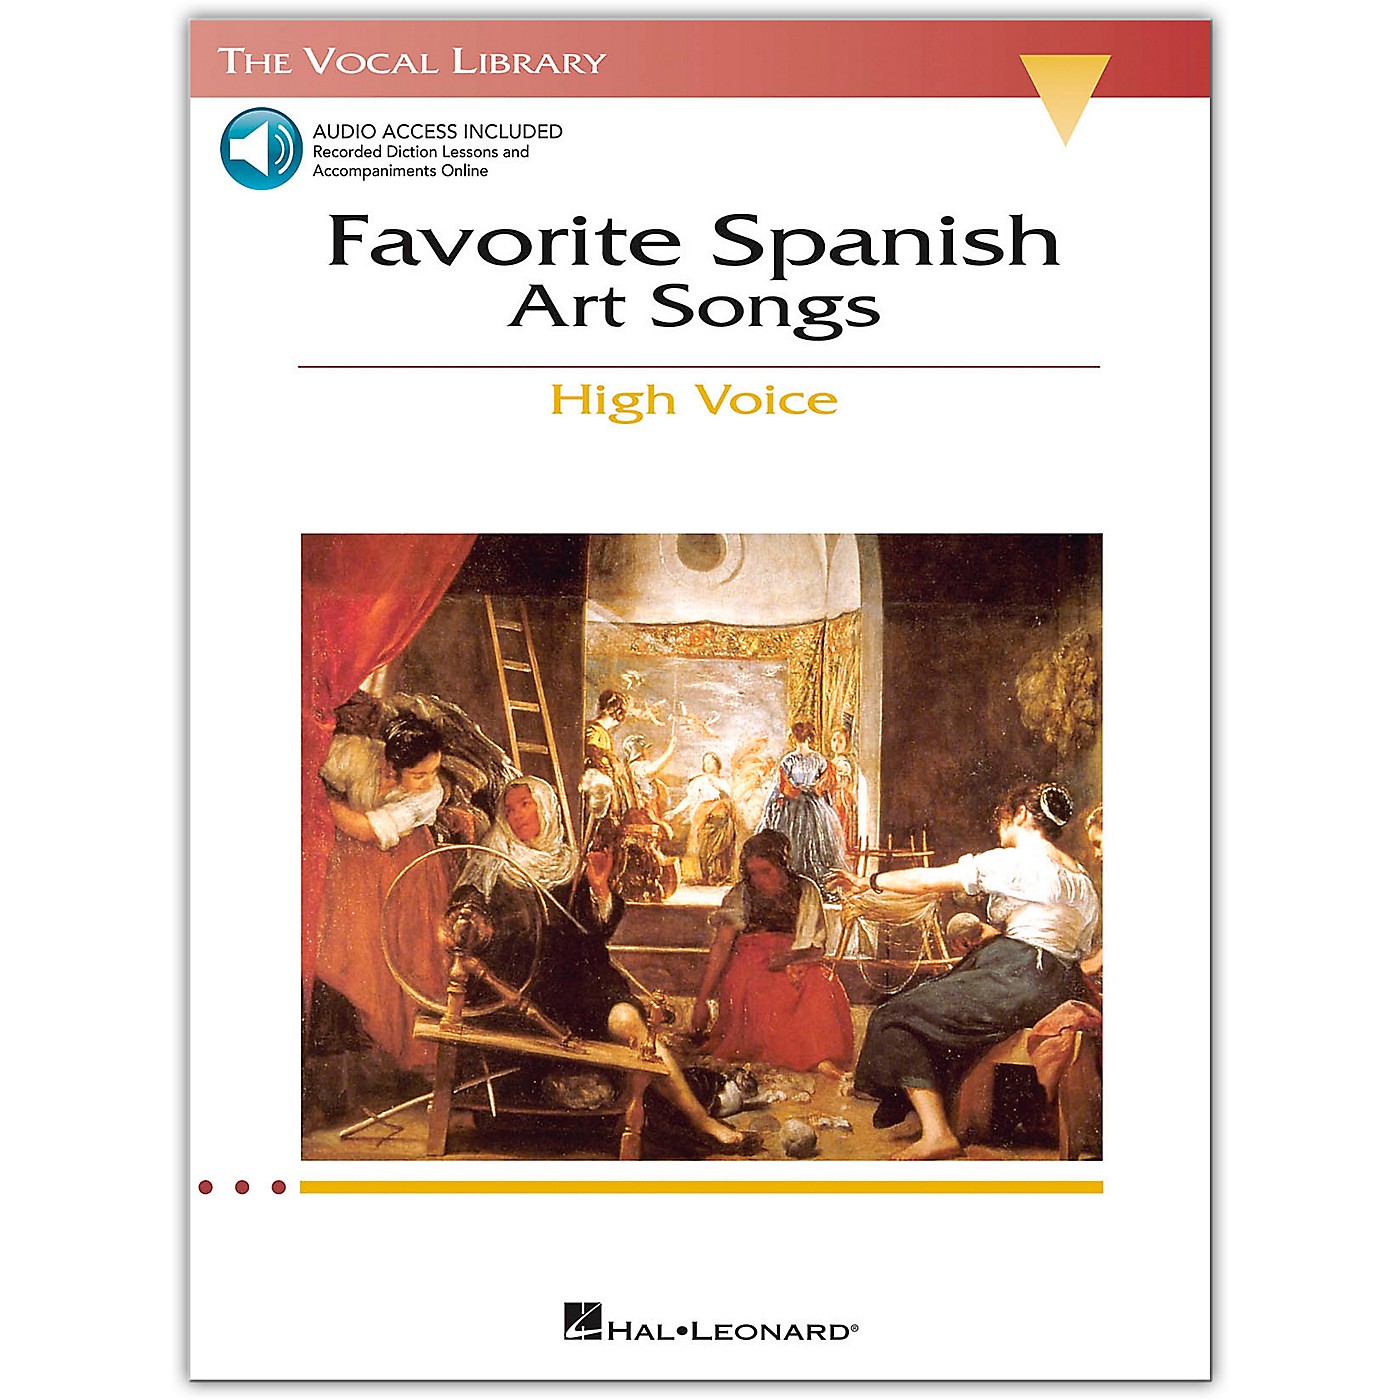 Hal Leonard The Vocal Library Series: Favorite Spanish Art Songs for High Voice (Book/Online Audio) thumbnail